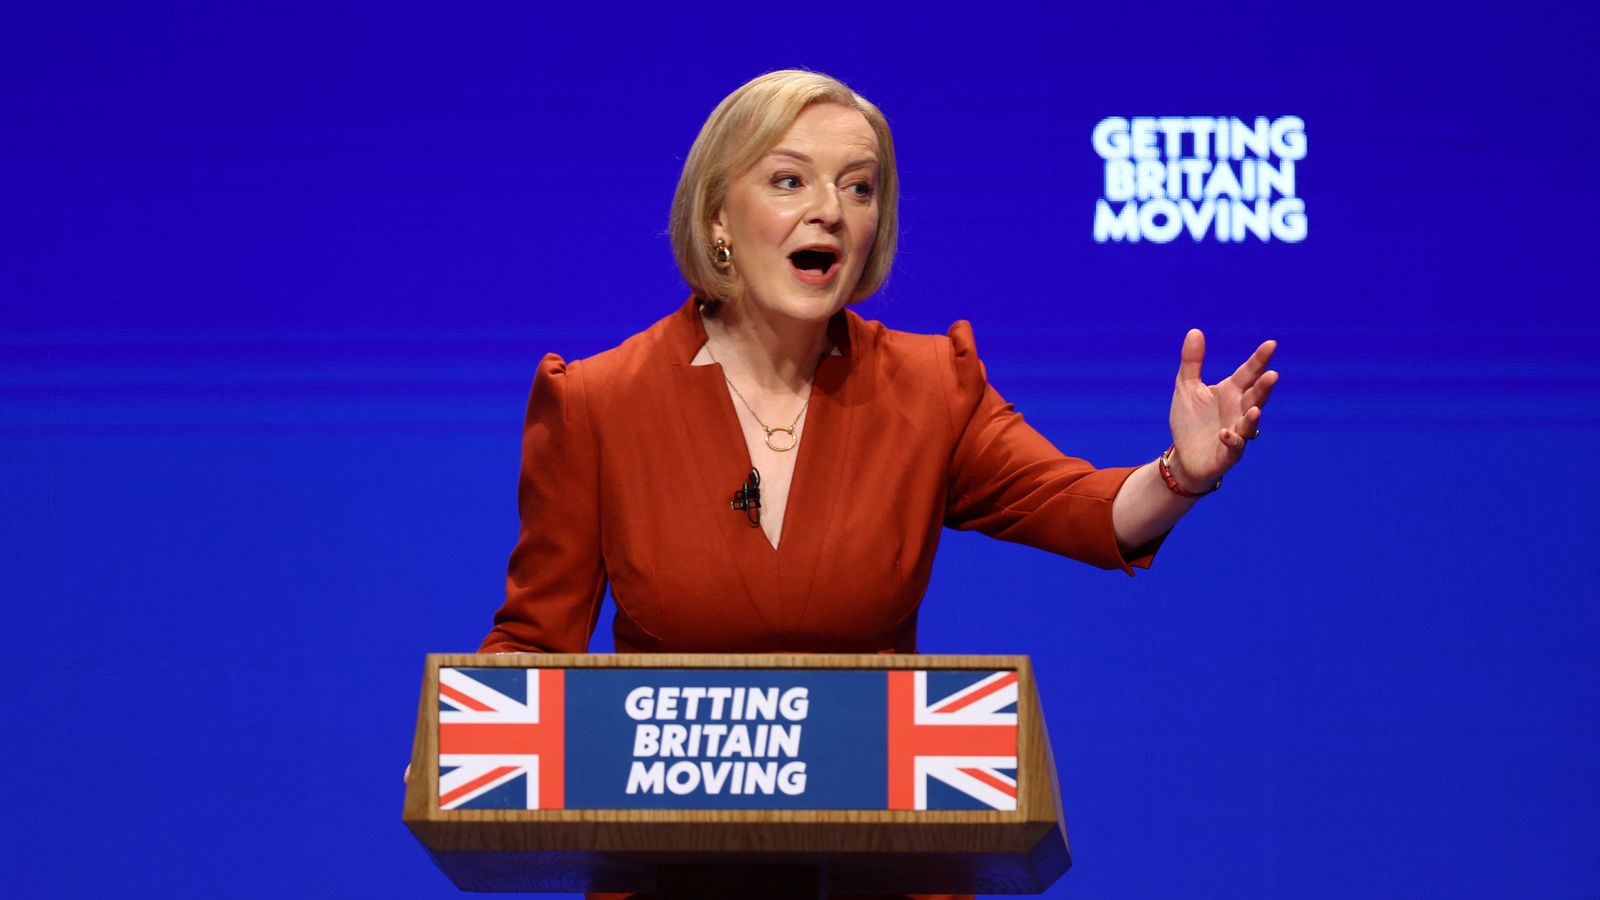 Prime Minister Liz Truss heckled during conference speech that warns of 'stormy days' ahead amid cabinet split